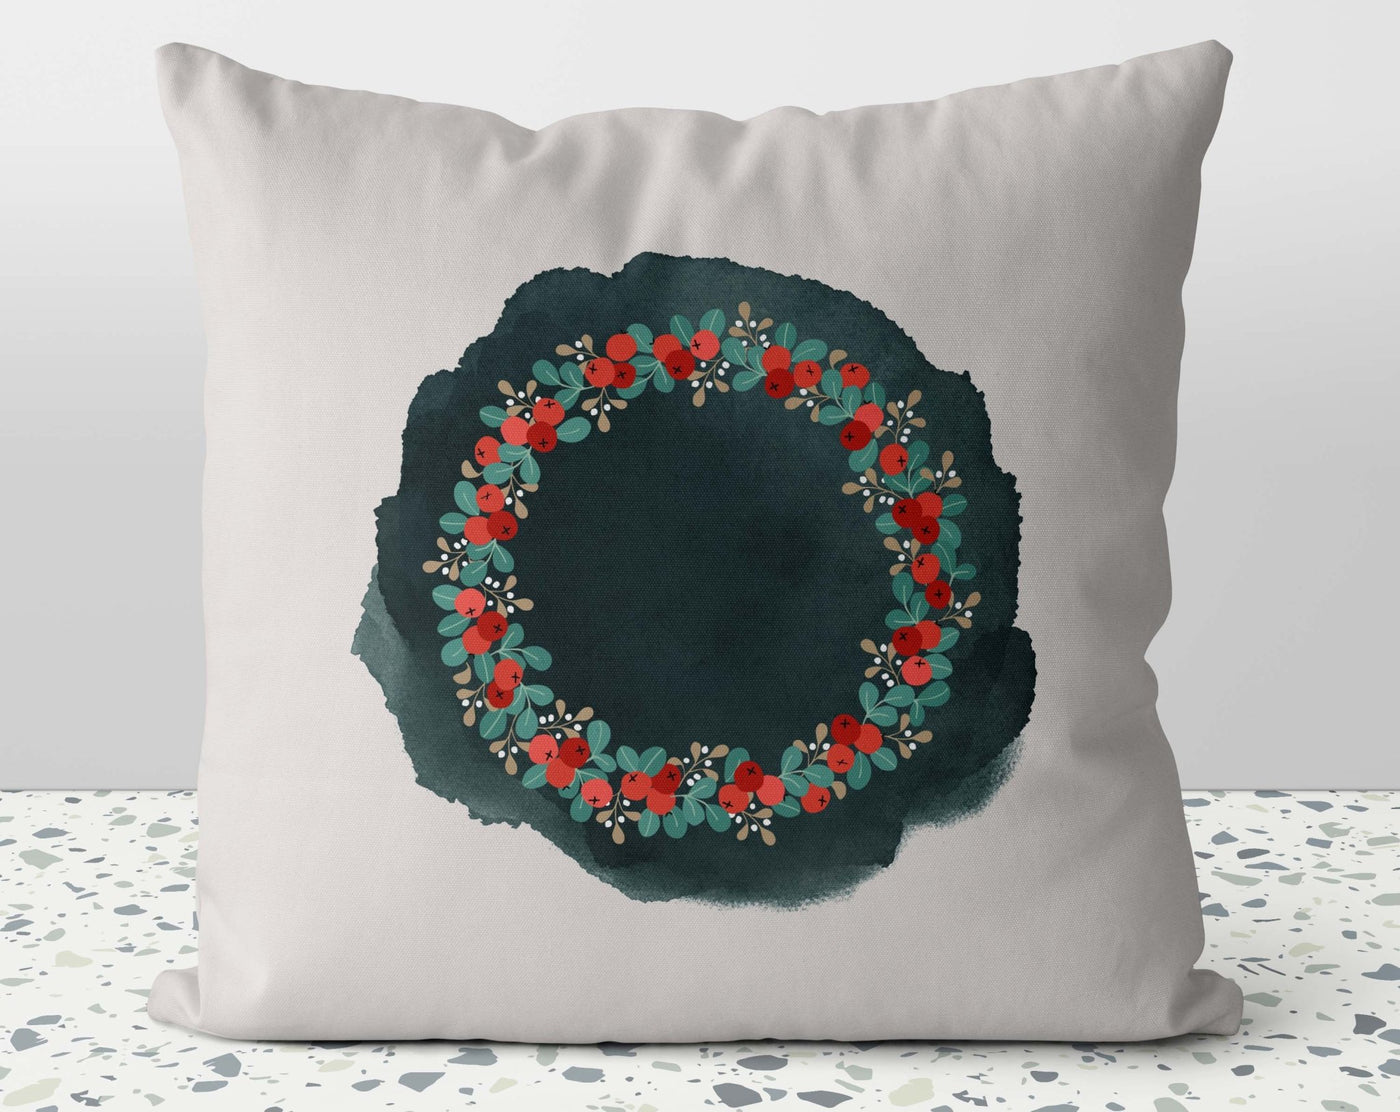 Christmas Festive Season Greetings Wreath Ornaments Green Beige Square Pillow Pillow Throw Cover